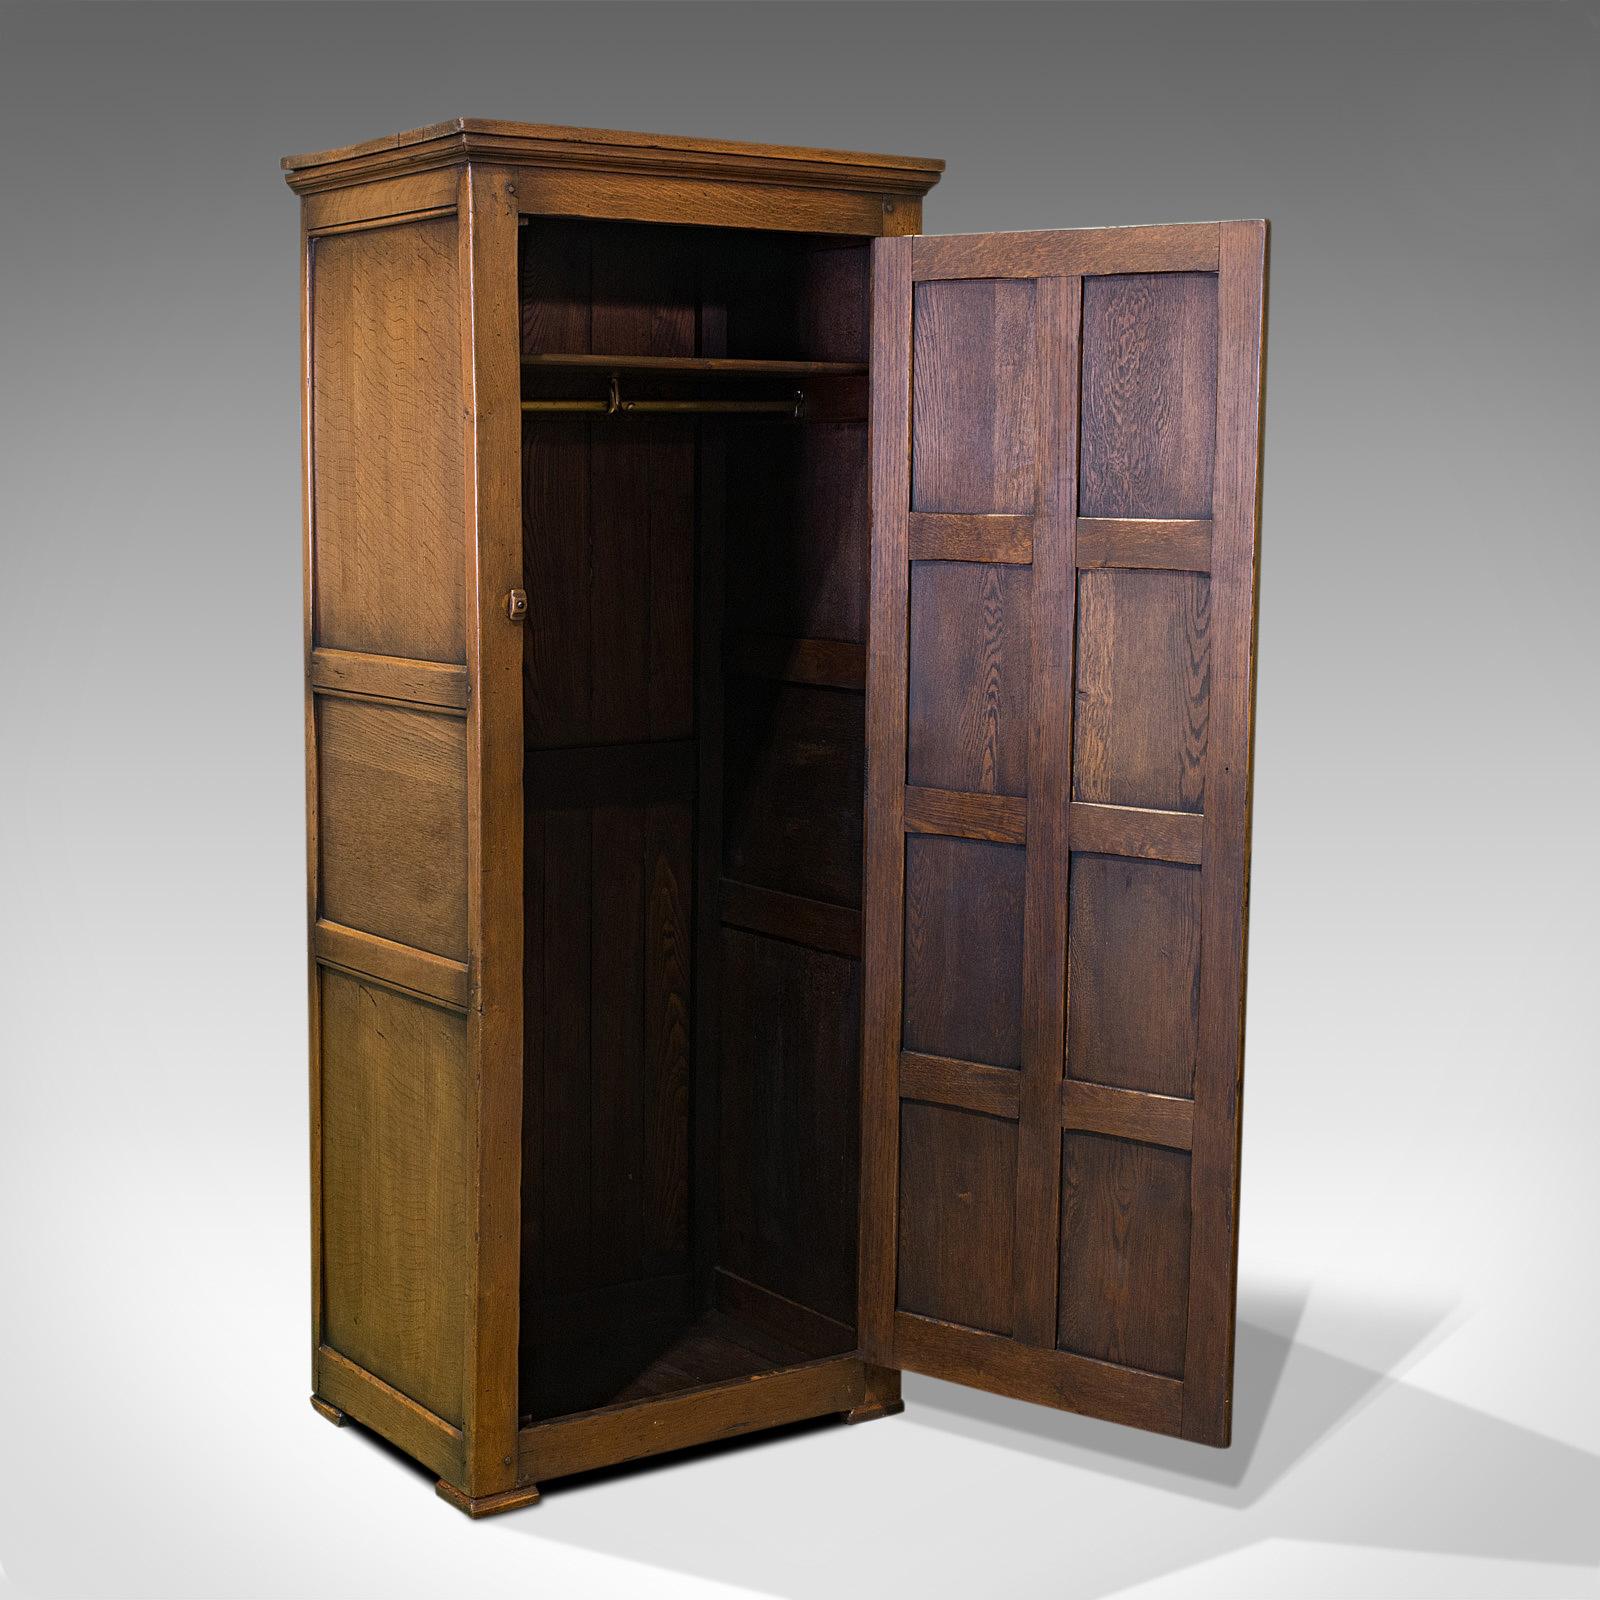 This is an antique hall cupboard. An English, Ipswich oak wardrobe or reception cloak closet dating to the Edwardian period, circa 1910.

Appealing hall or reception cupboard
Displays a desirable aged patina
Select oak shows fine grain